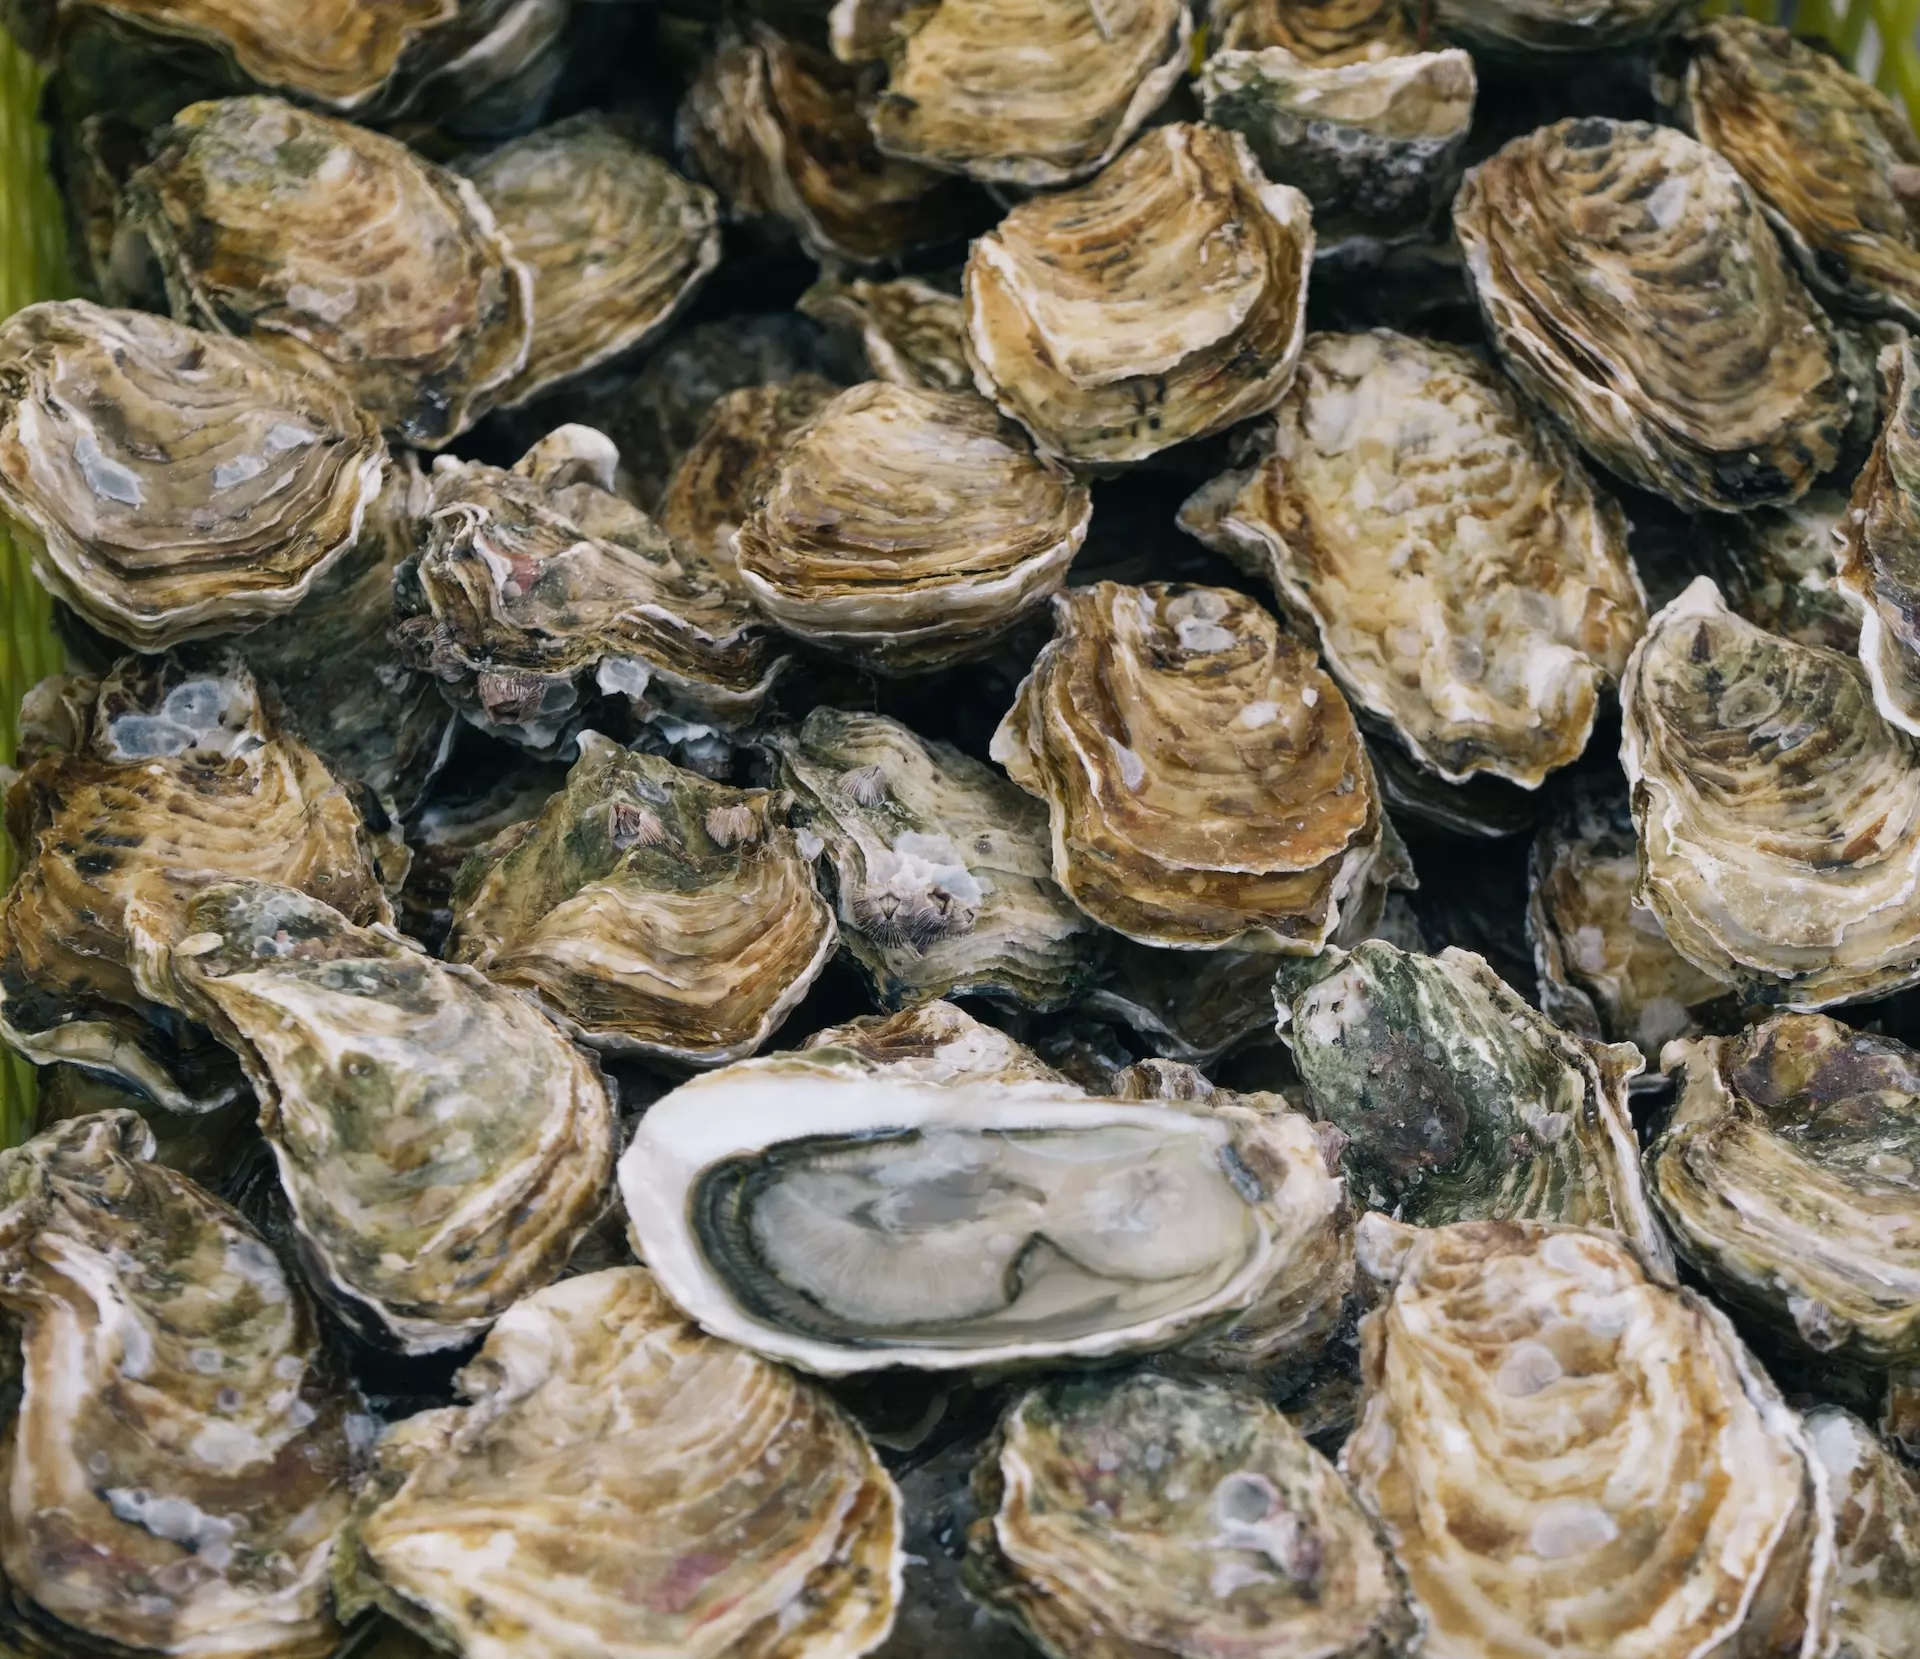 The market of oysters